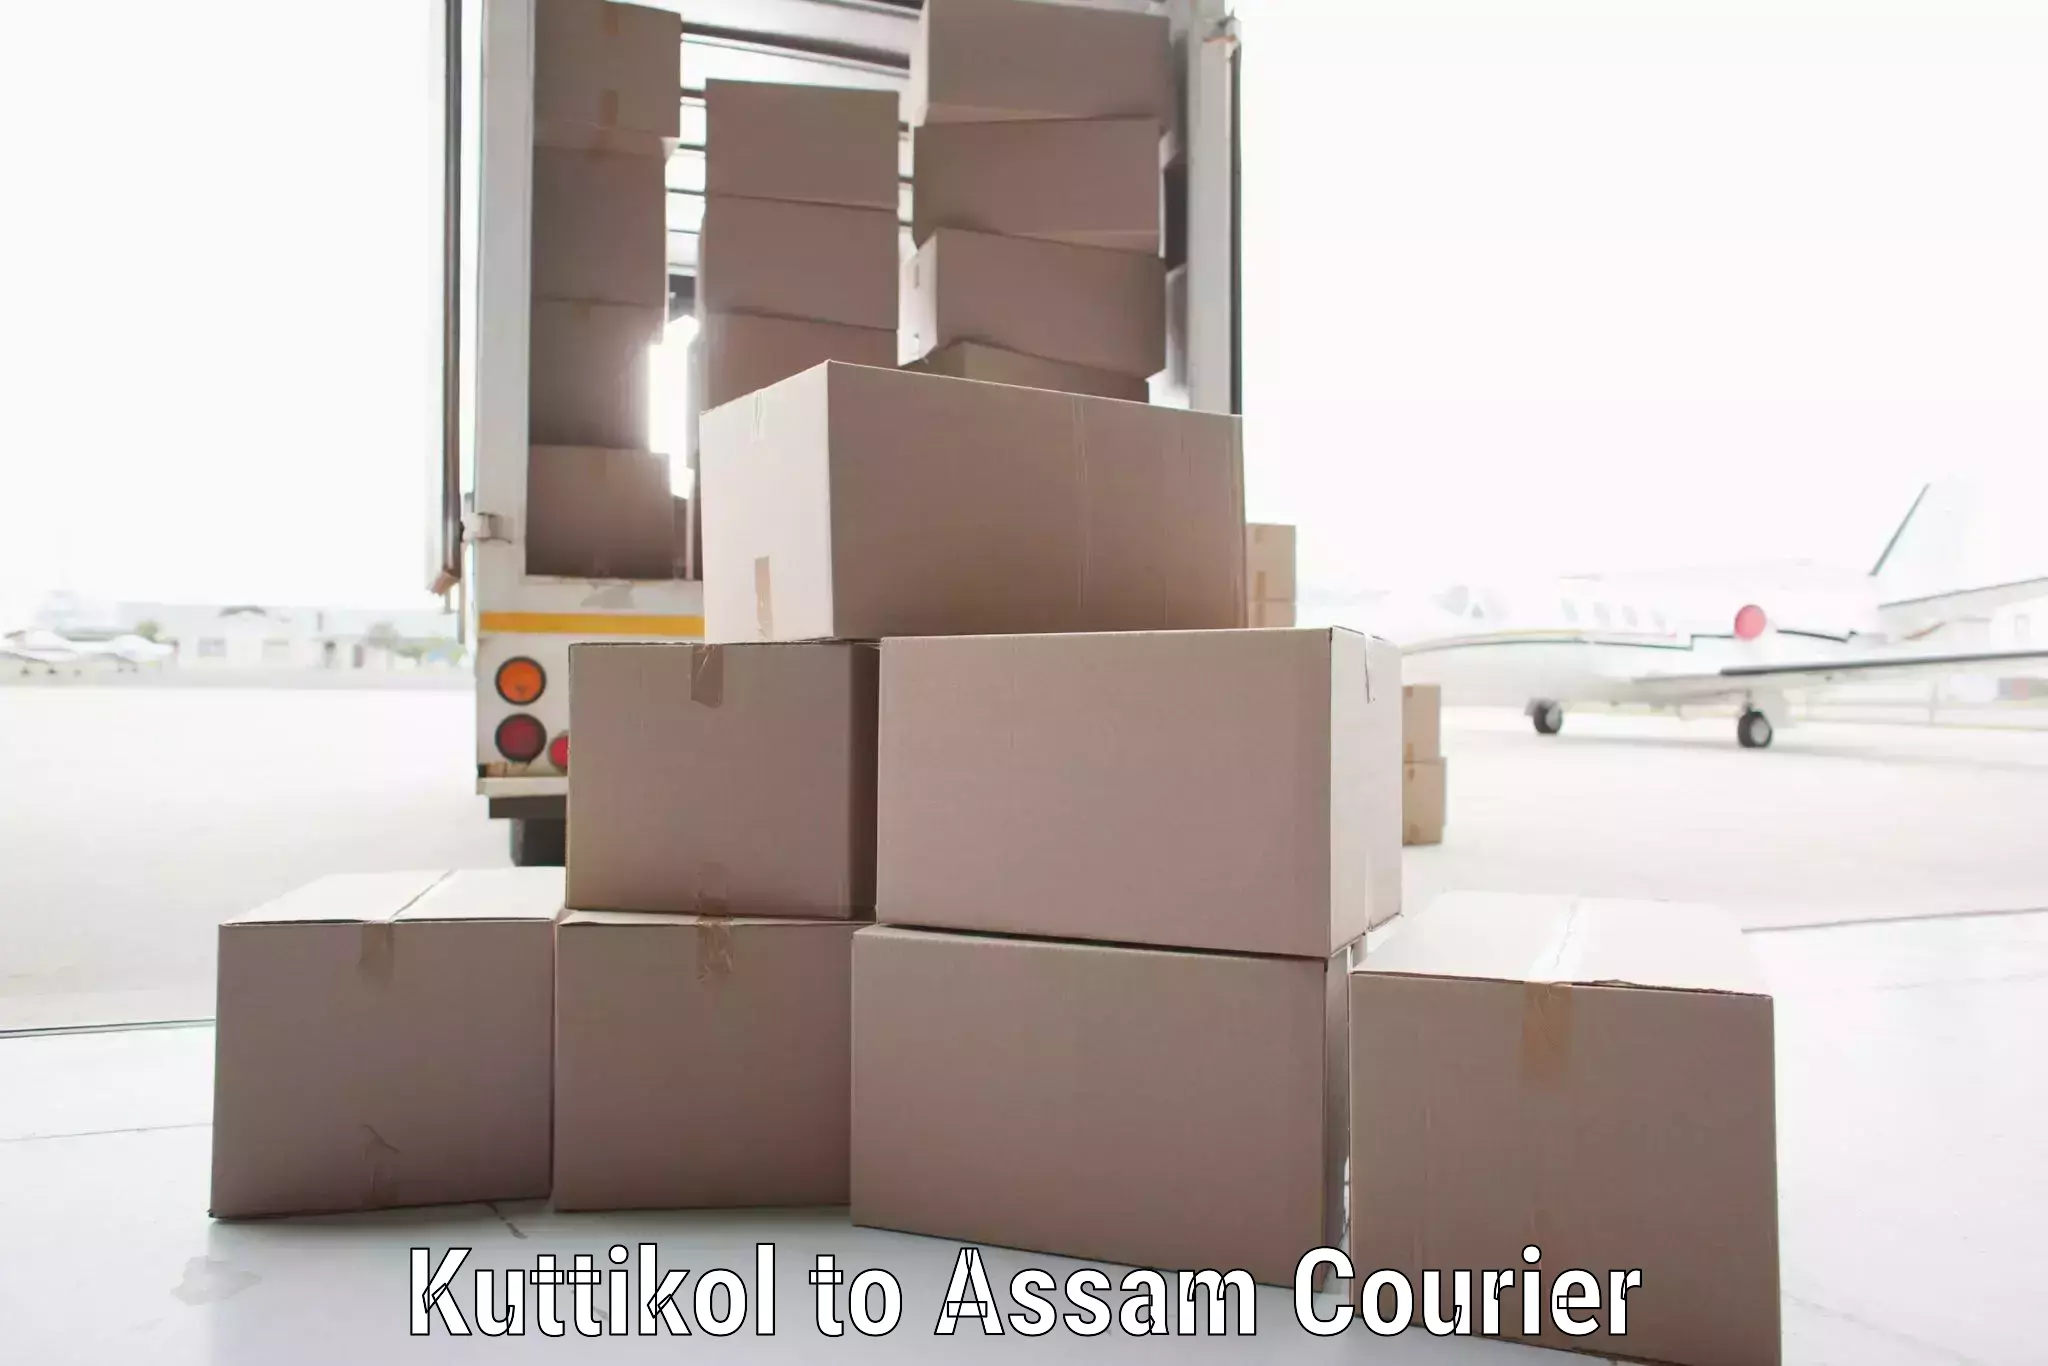 Reliable courier service Kuttikol to Kampur